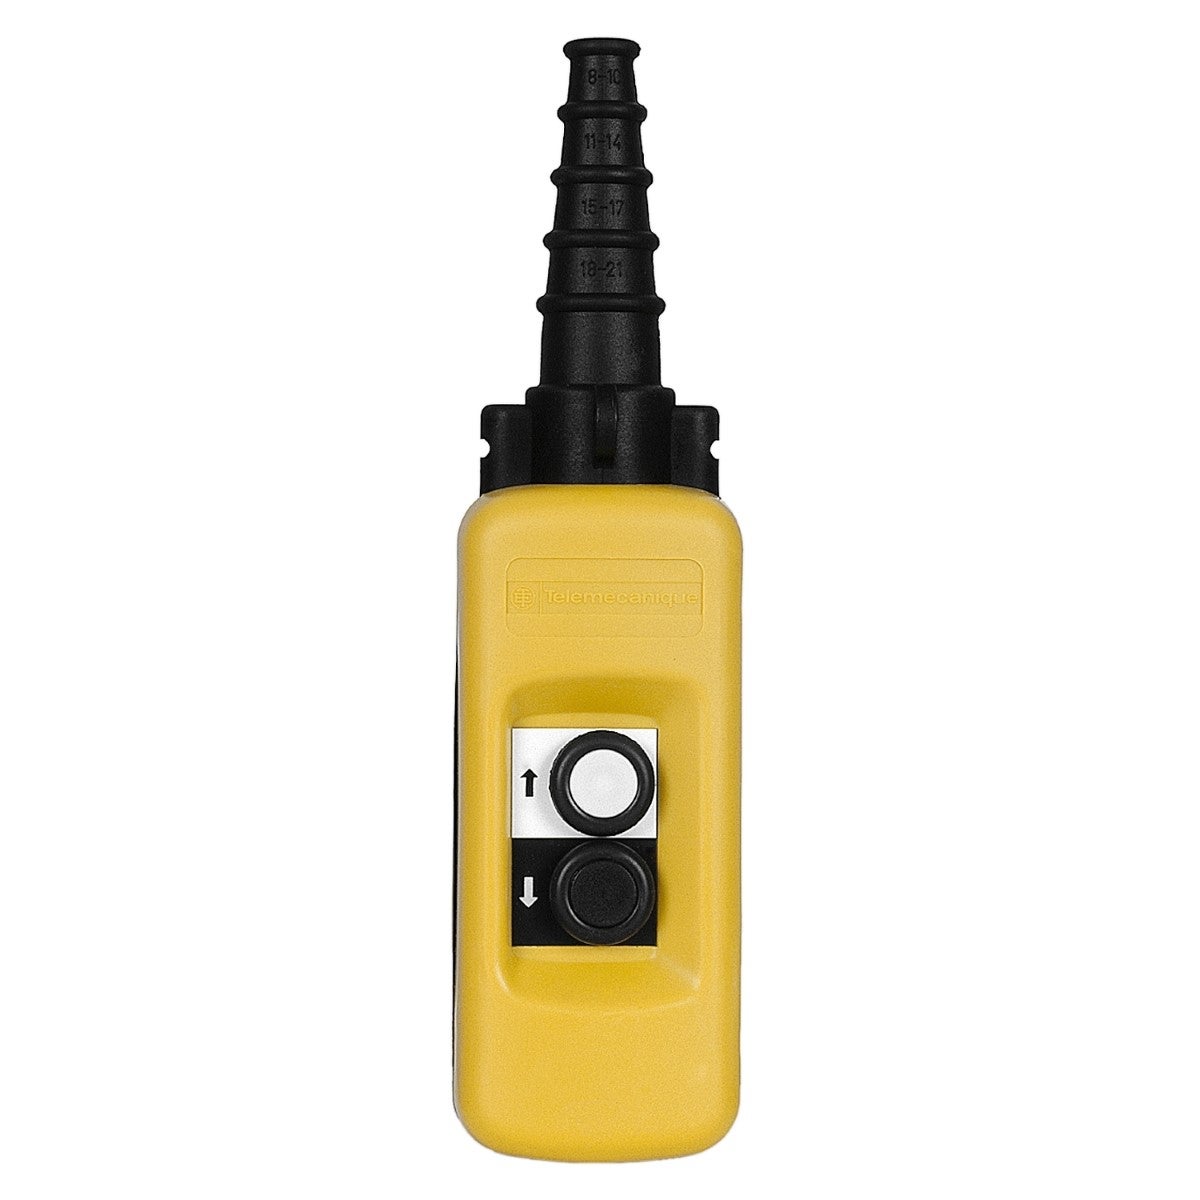 Pendant control station, Harmony XAC, plastic, yellow, 2 push buttons with NO+NC